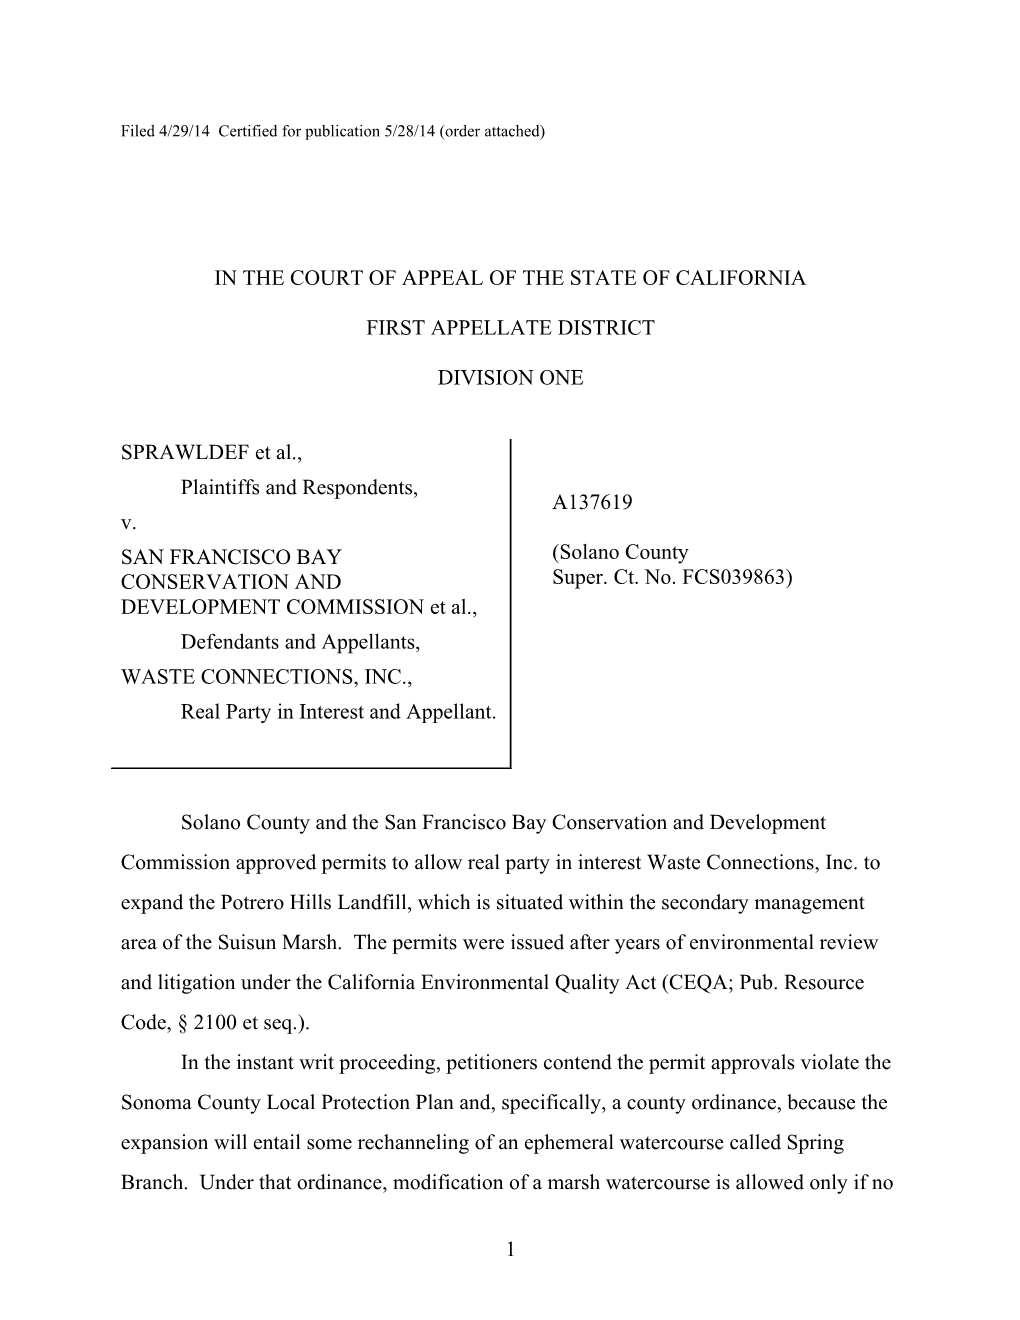 Filed 4/29/14 Certified for Publication 5/28/14 (Order Attached)